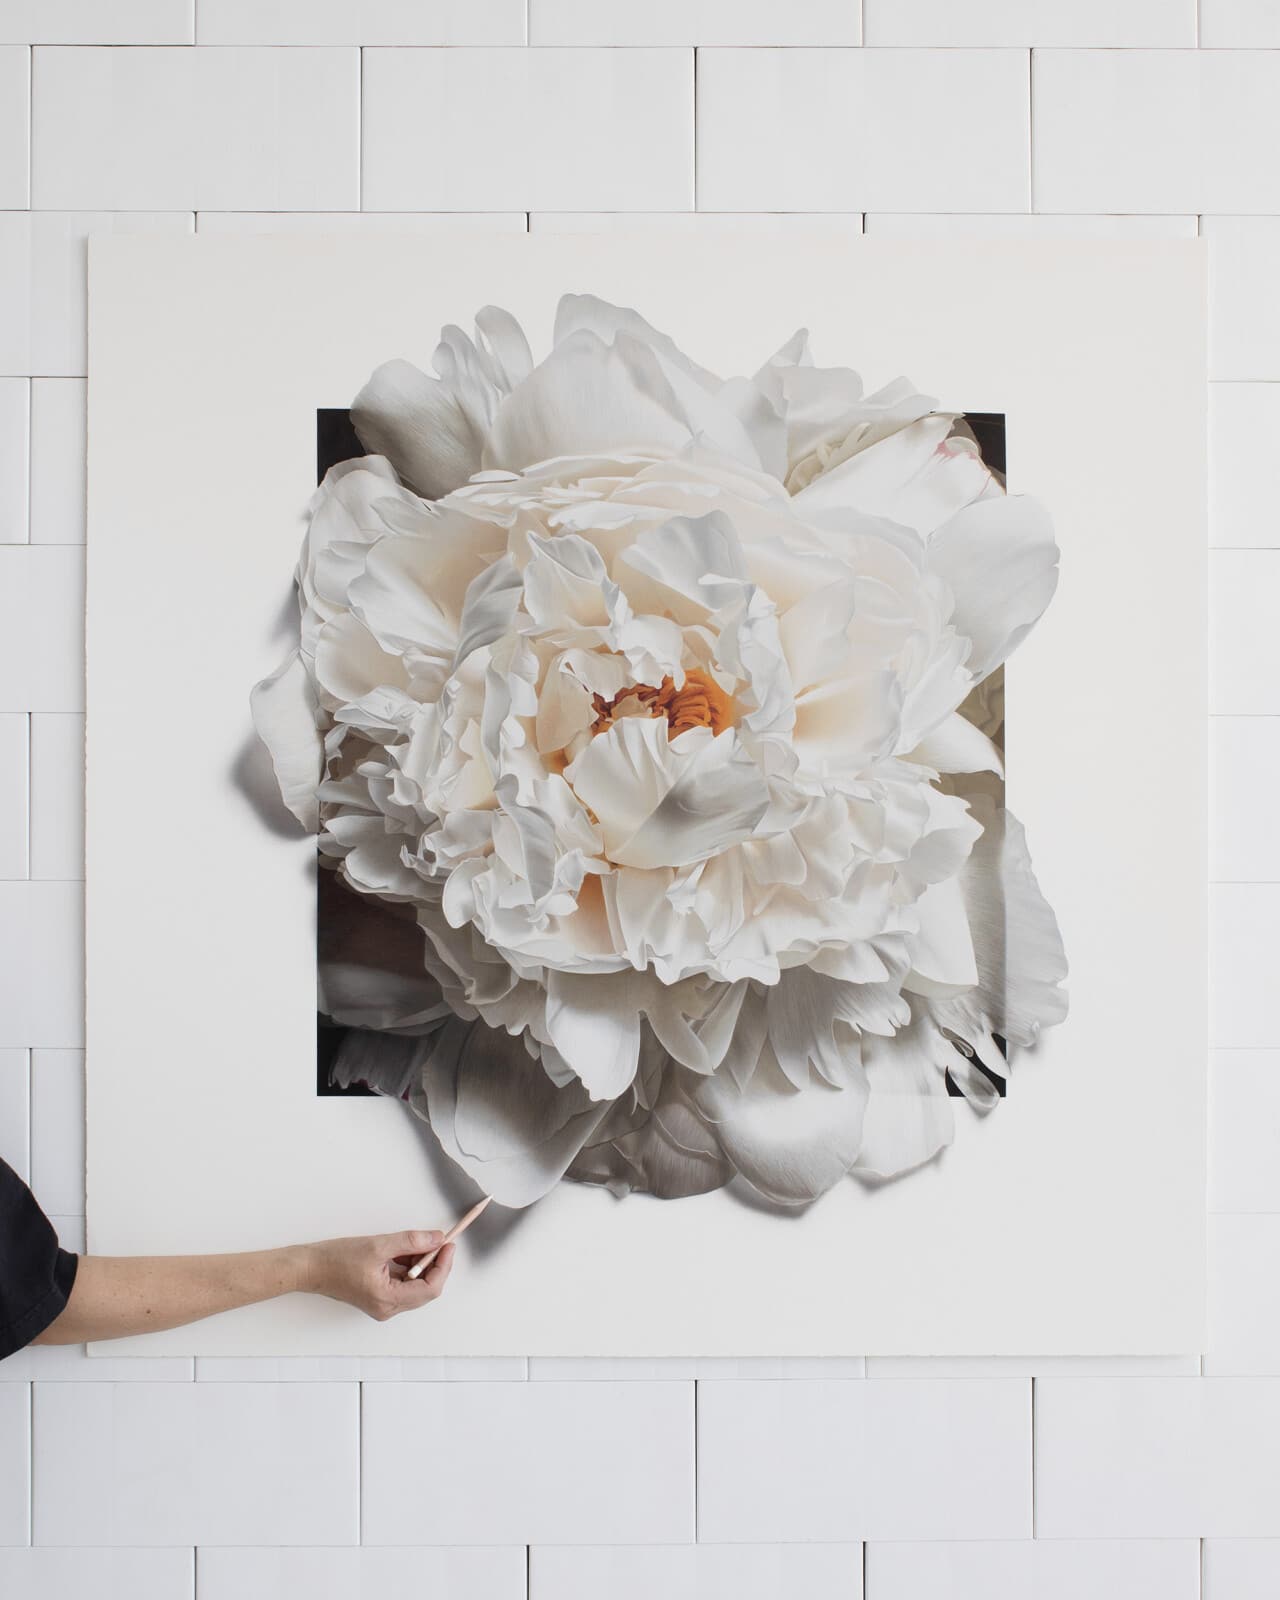 Floral Colored Pencil Drawings by CJ Hendry